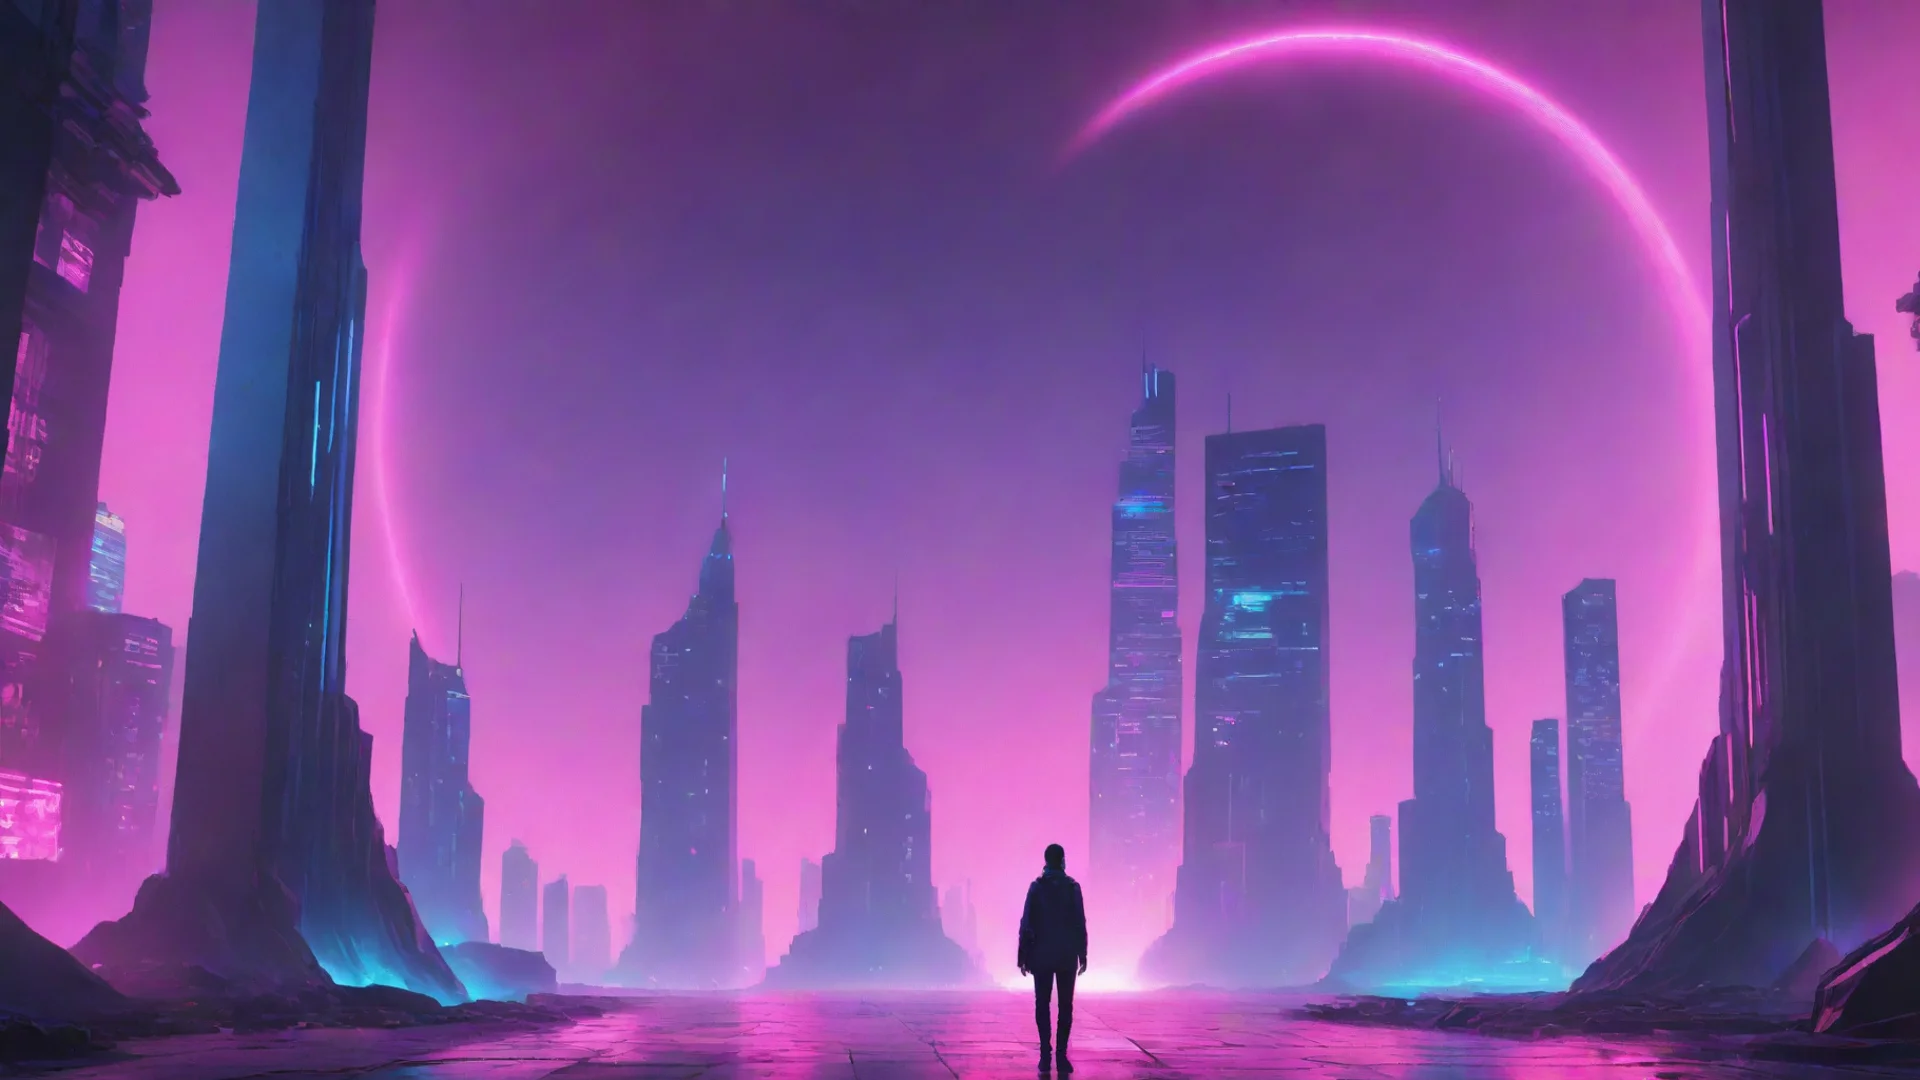 aiamazing synthwave of a futuristic city and a man standing behind the portal awesome portrait 2 wide